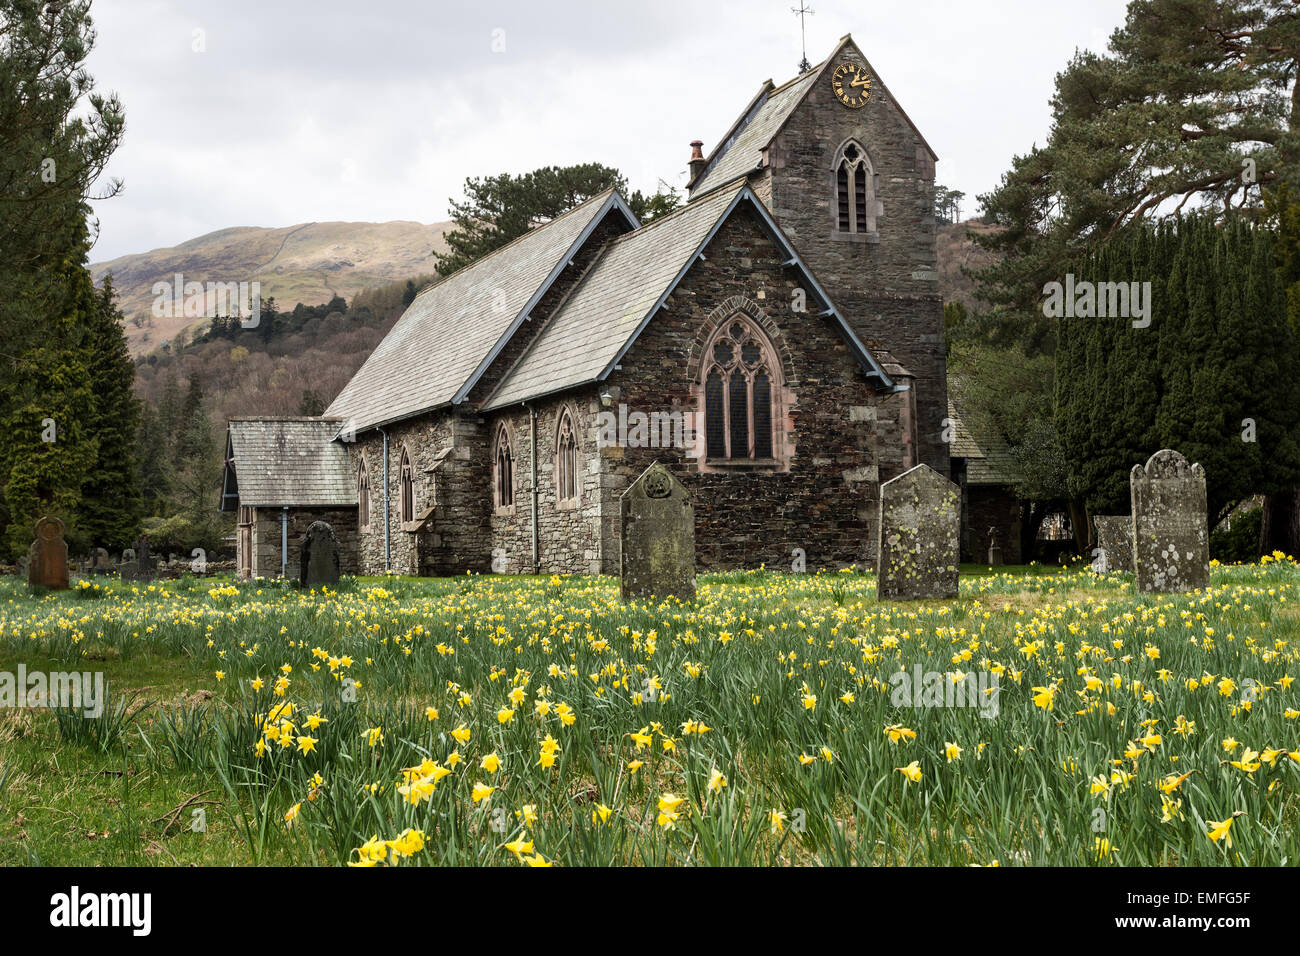 Spring Flowers in the Graveyard of St Patrick's Church in the Village of Patterdale, Lake District Cumbria England UK Stock Photo